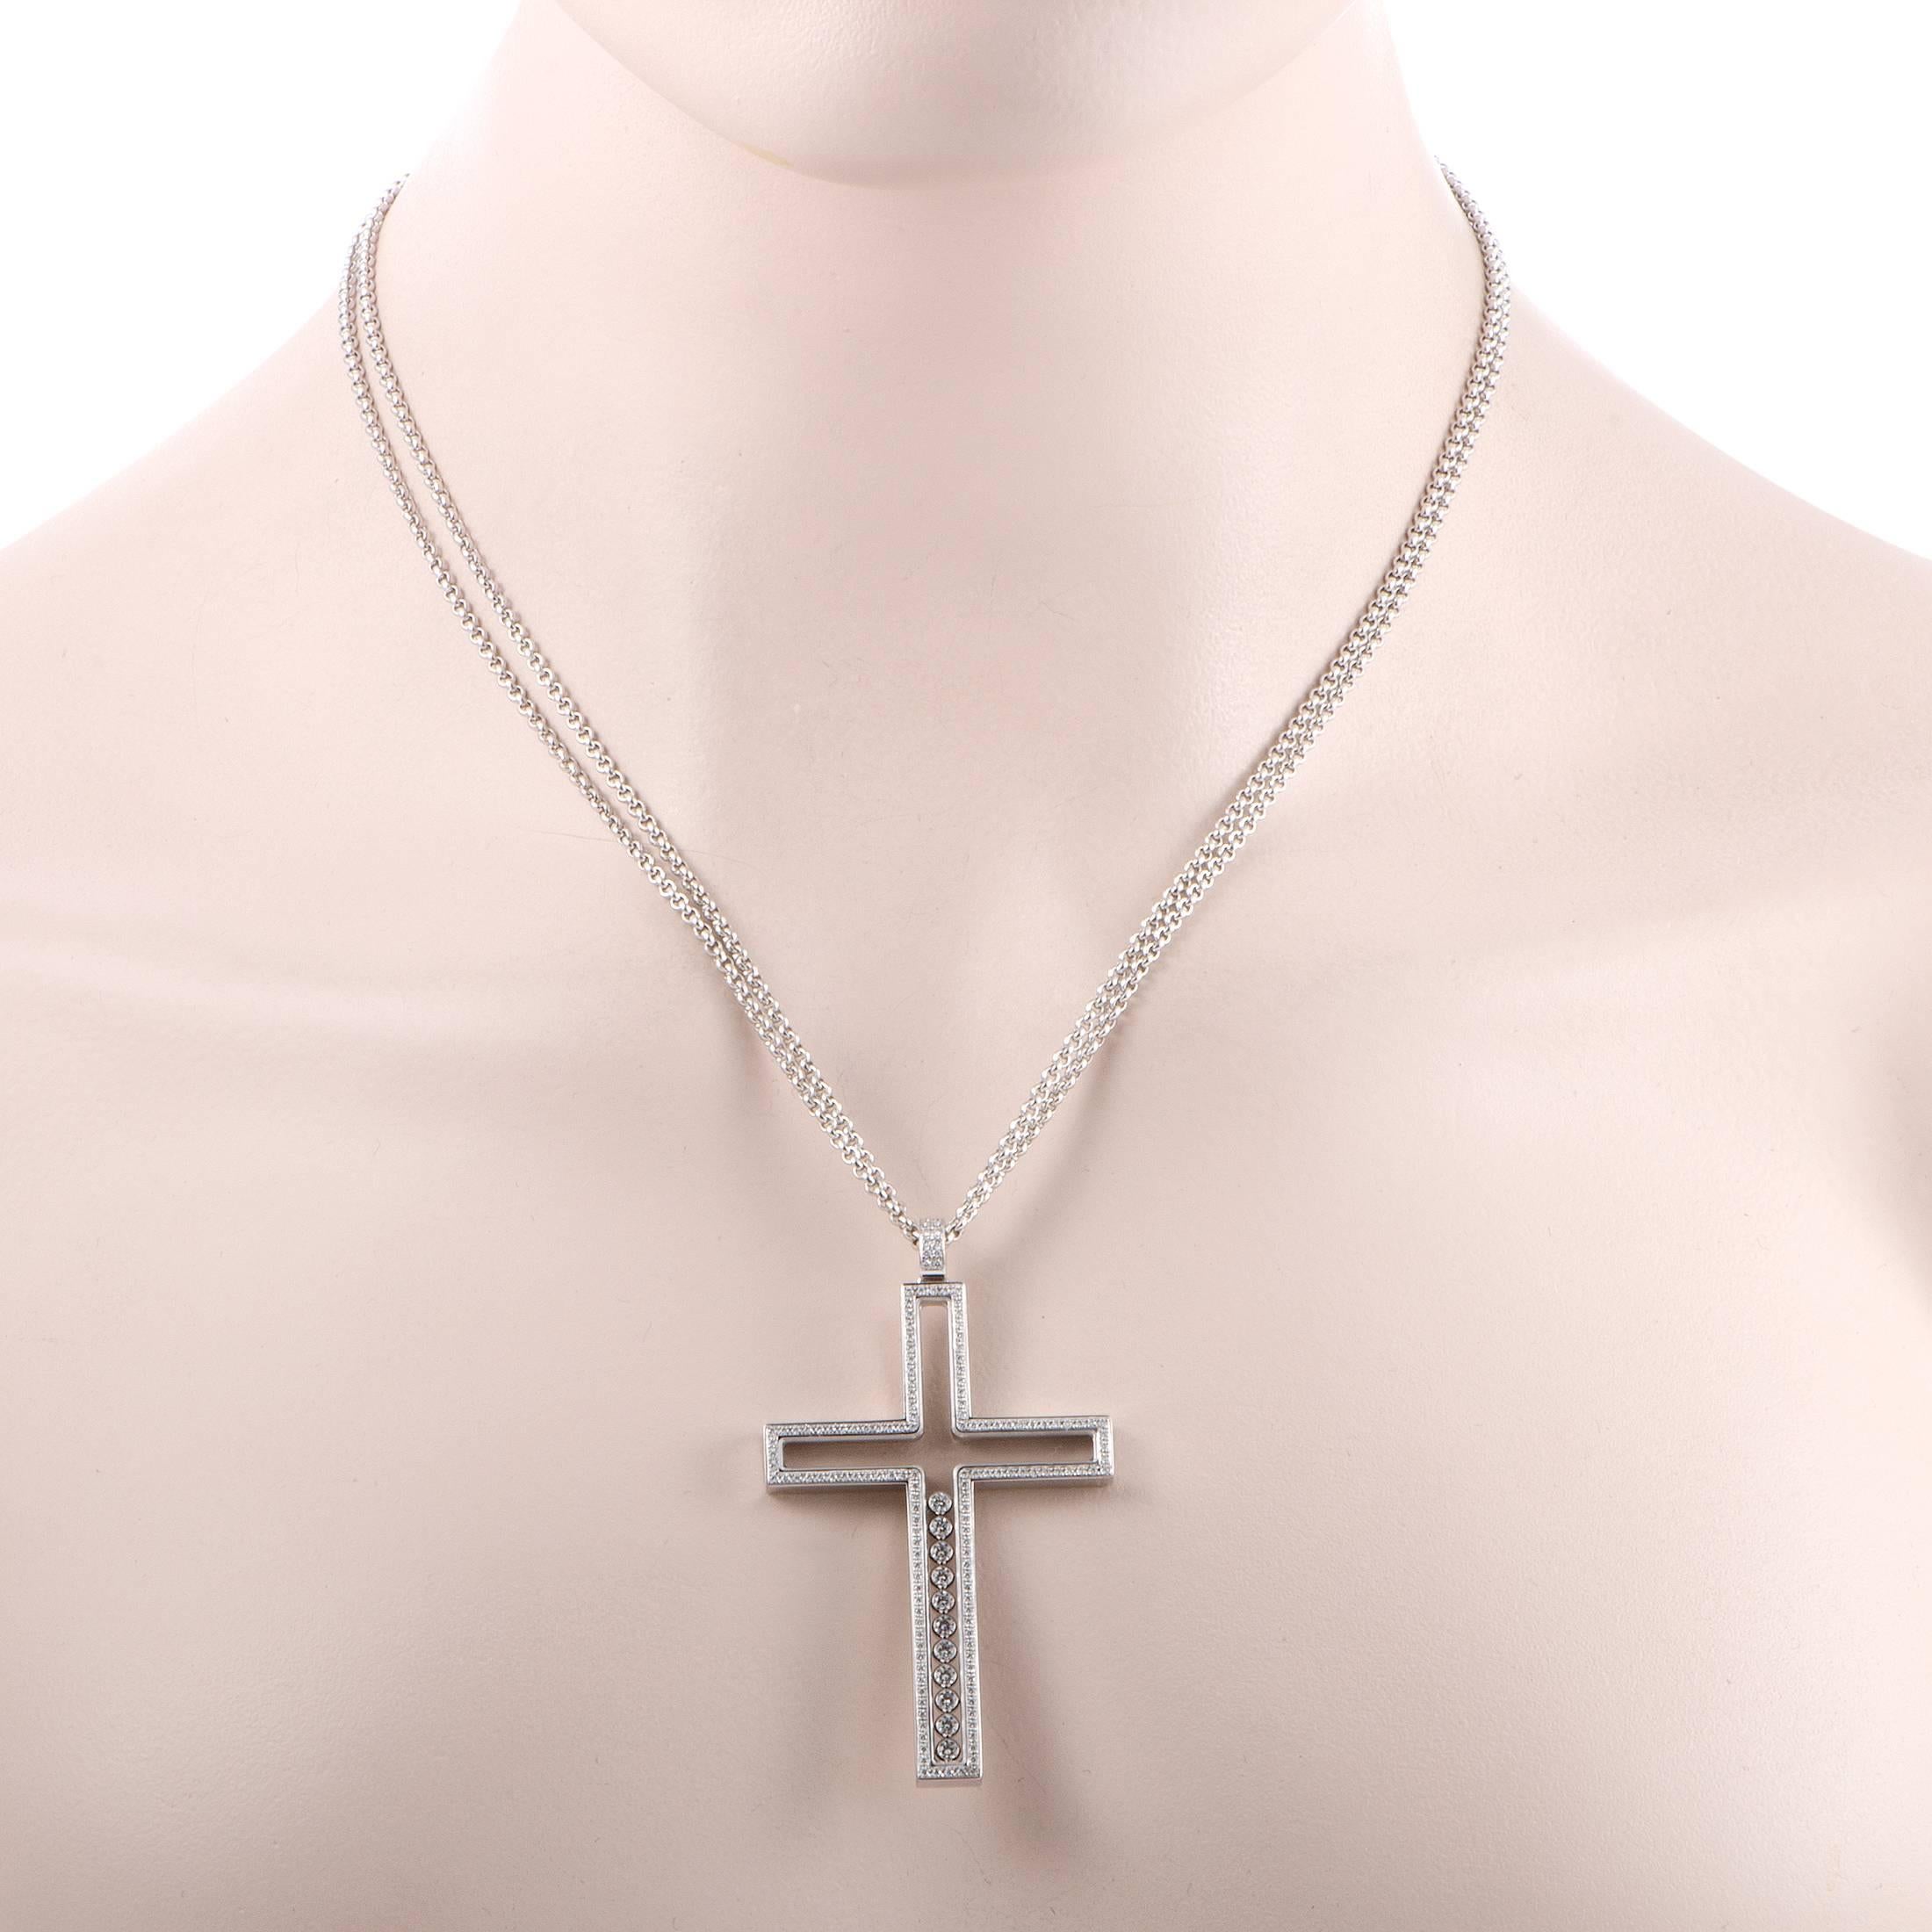 Magnificence and grace are personified in this breathtaking 1.13ct diamond paved cross-shaped pendant necklace by Chopard. The pendant boasts 11 floating diamonds from the center of the cross add to the finesse and elegance of the 18K white gold